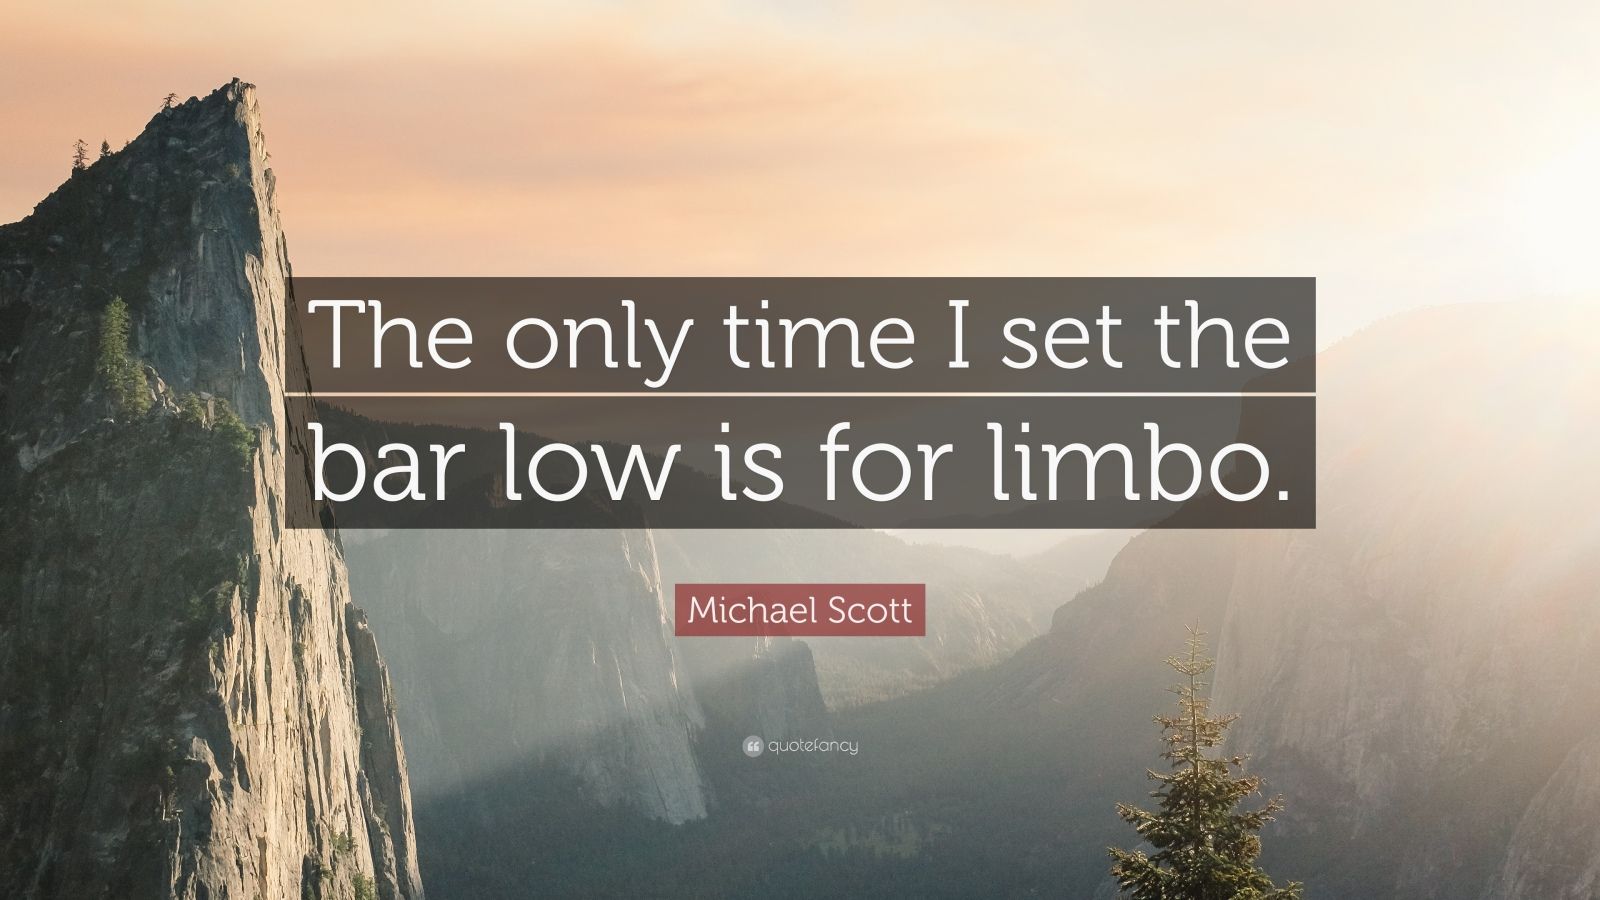 Michael Scott Quote: “The only time I set the bar low is for limbo